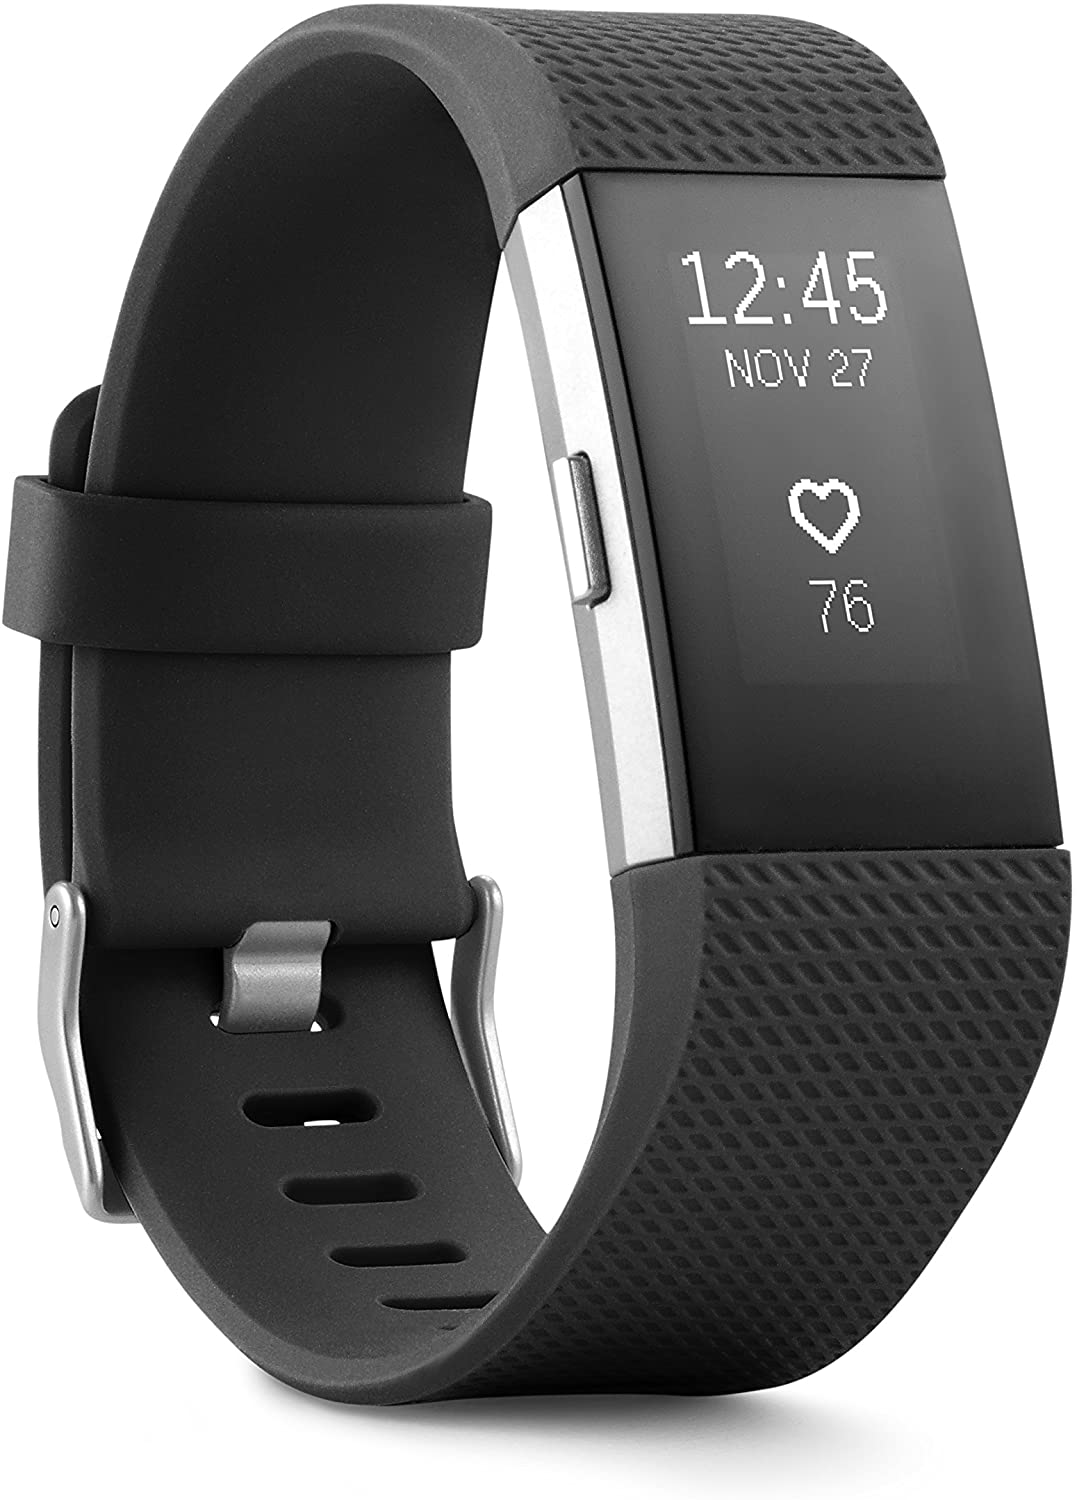 Fitbit Charge 2 Heart Rate + Fitness Wristband, Black, Large (US Version), 